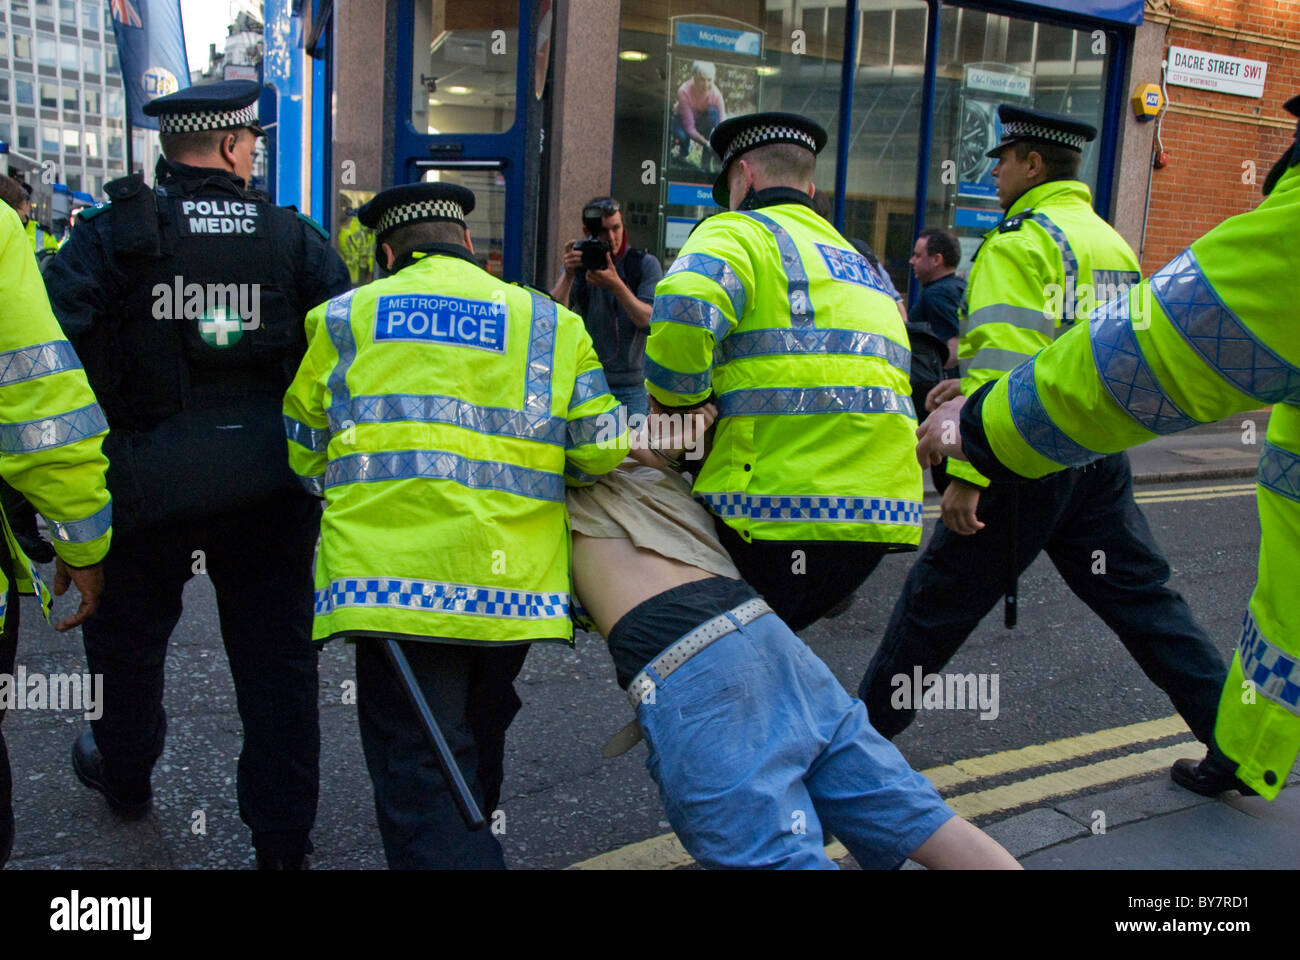 Police arresting protesting youth at demonstration Stock Photo